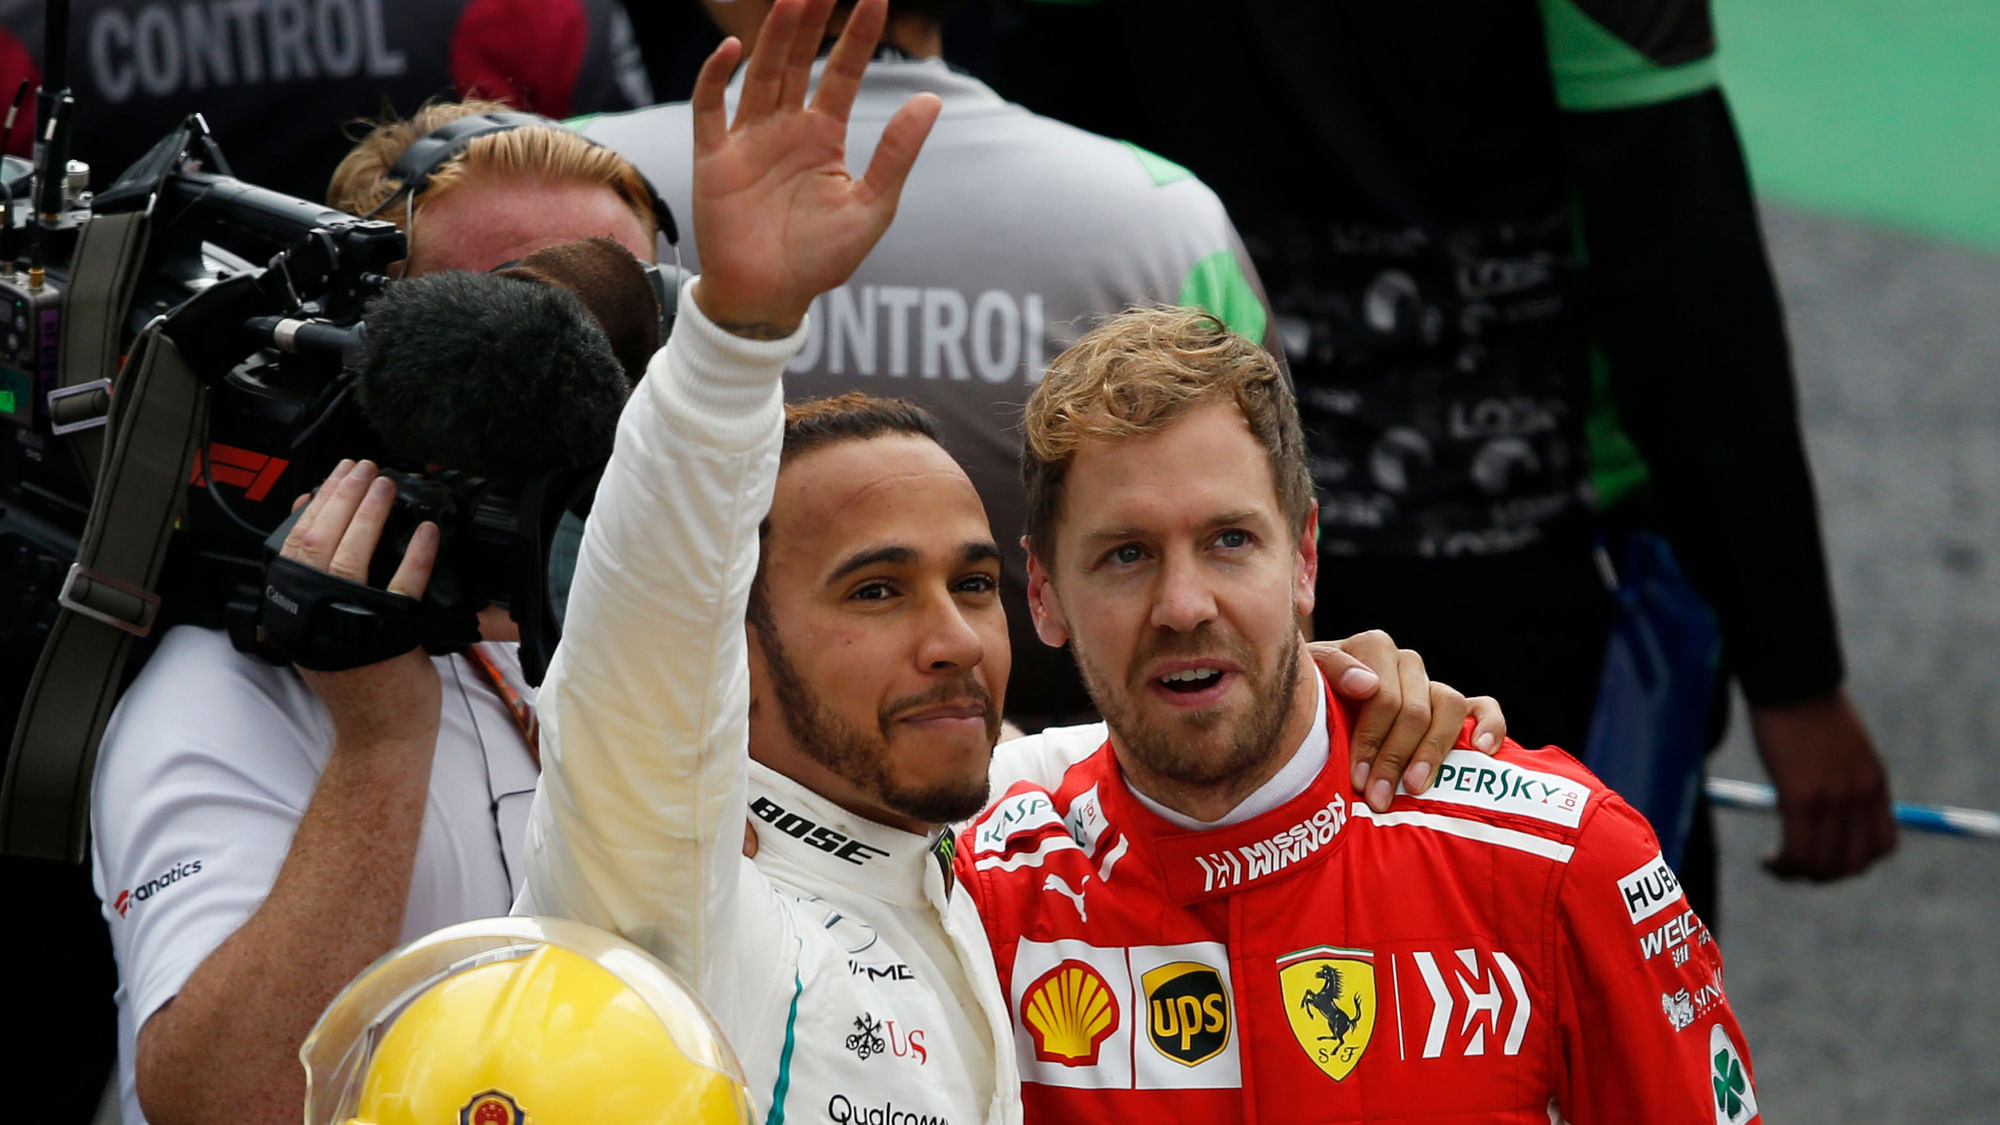 Mercedes driver Lewis Hamilton, of Britain, and Ferrari driver Sebastian Vettel, of Germany, right, embrace at the end of the Formula One Mexico Grand Prix.